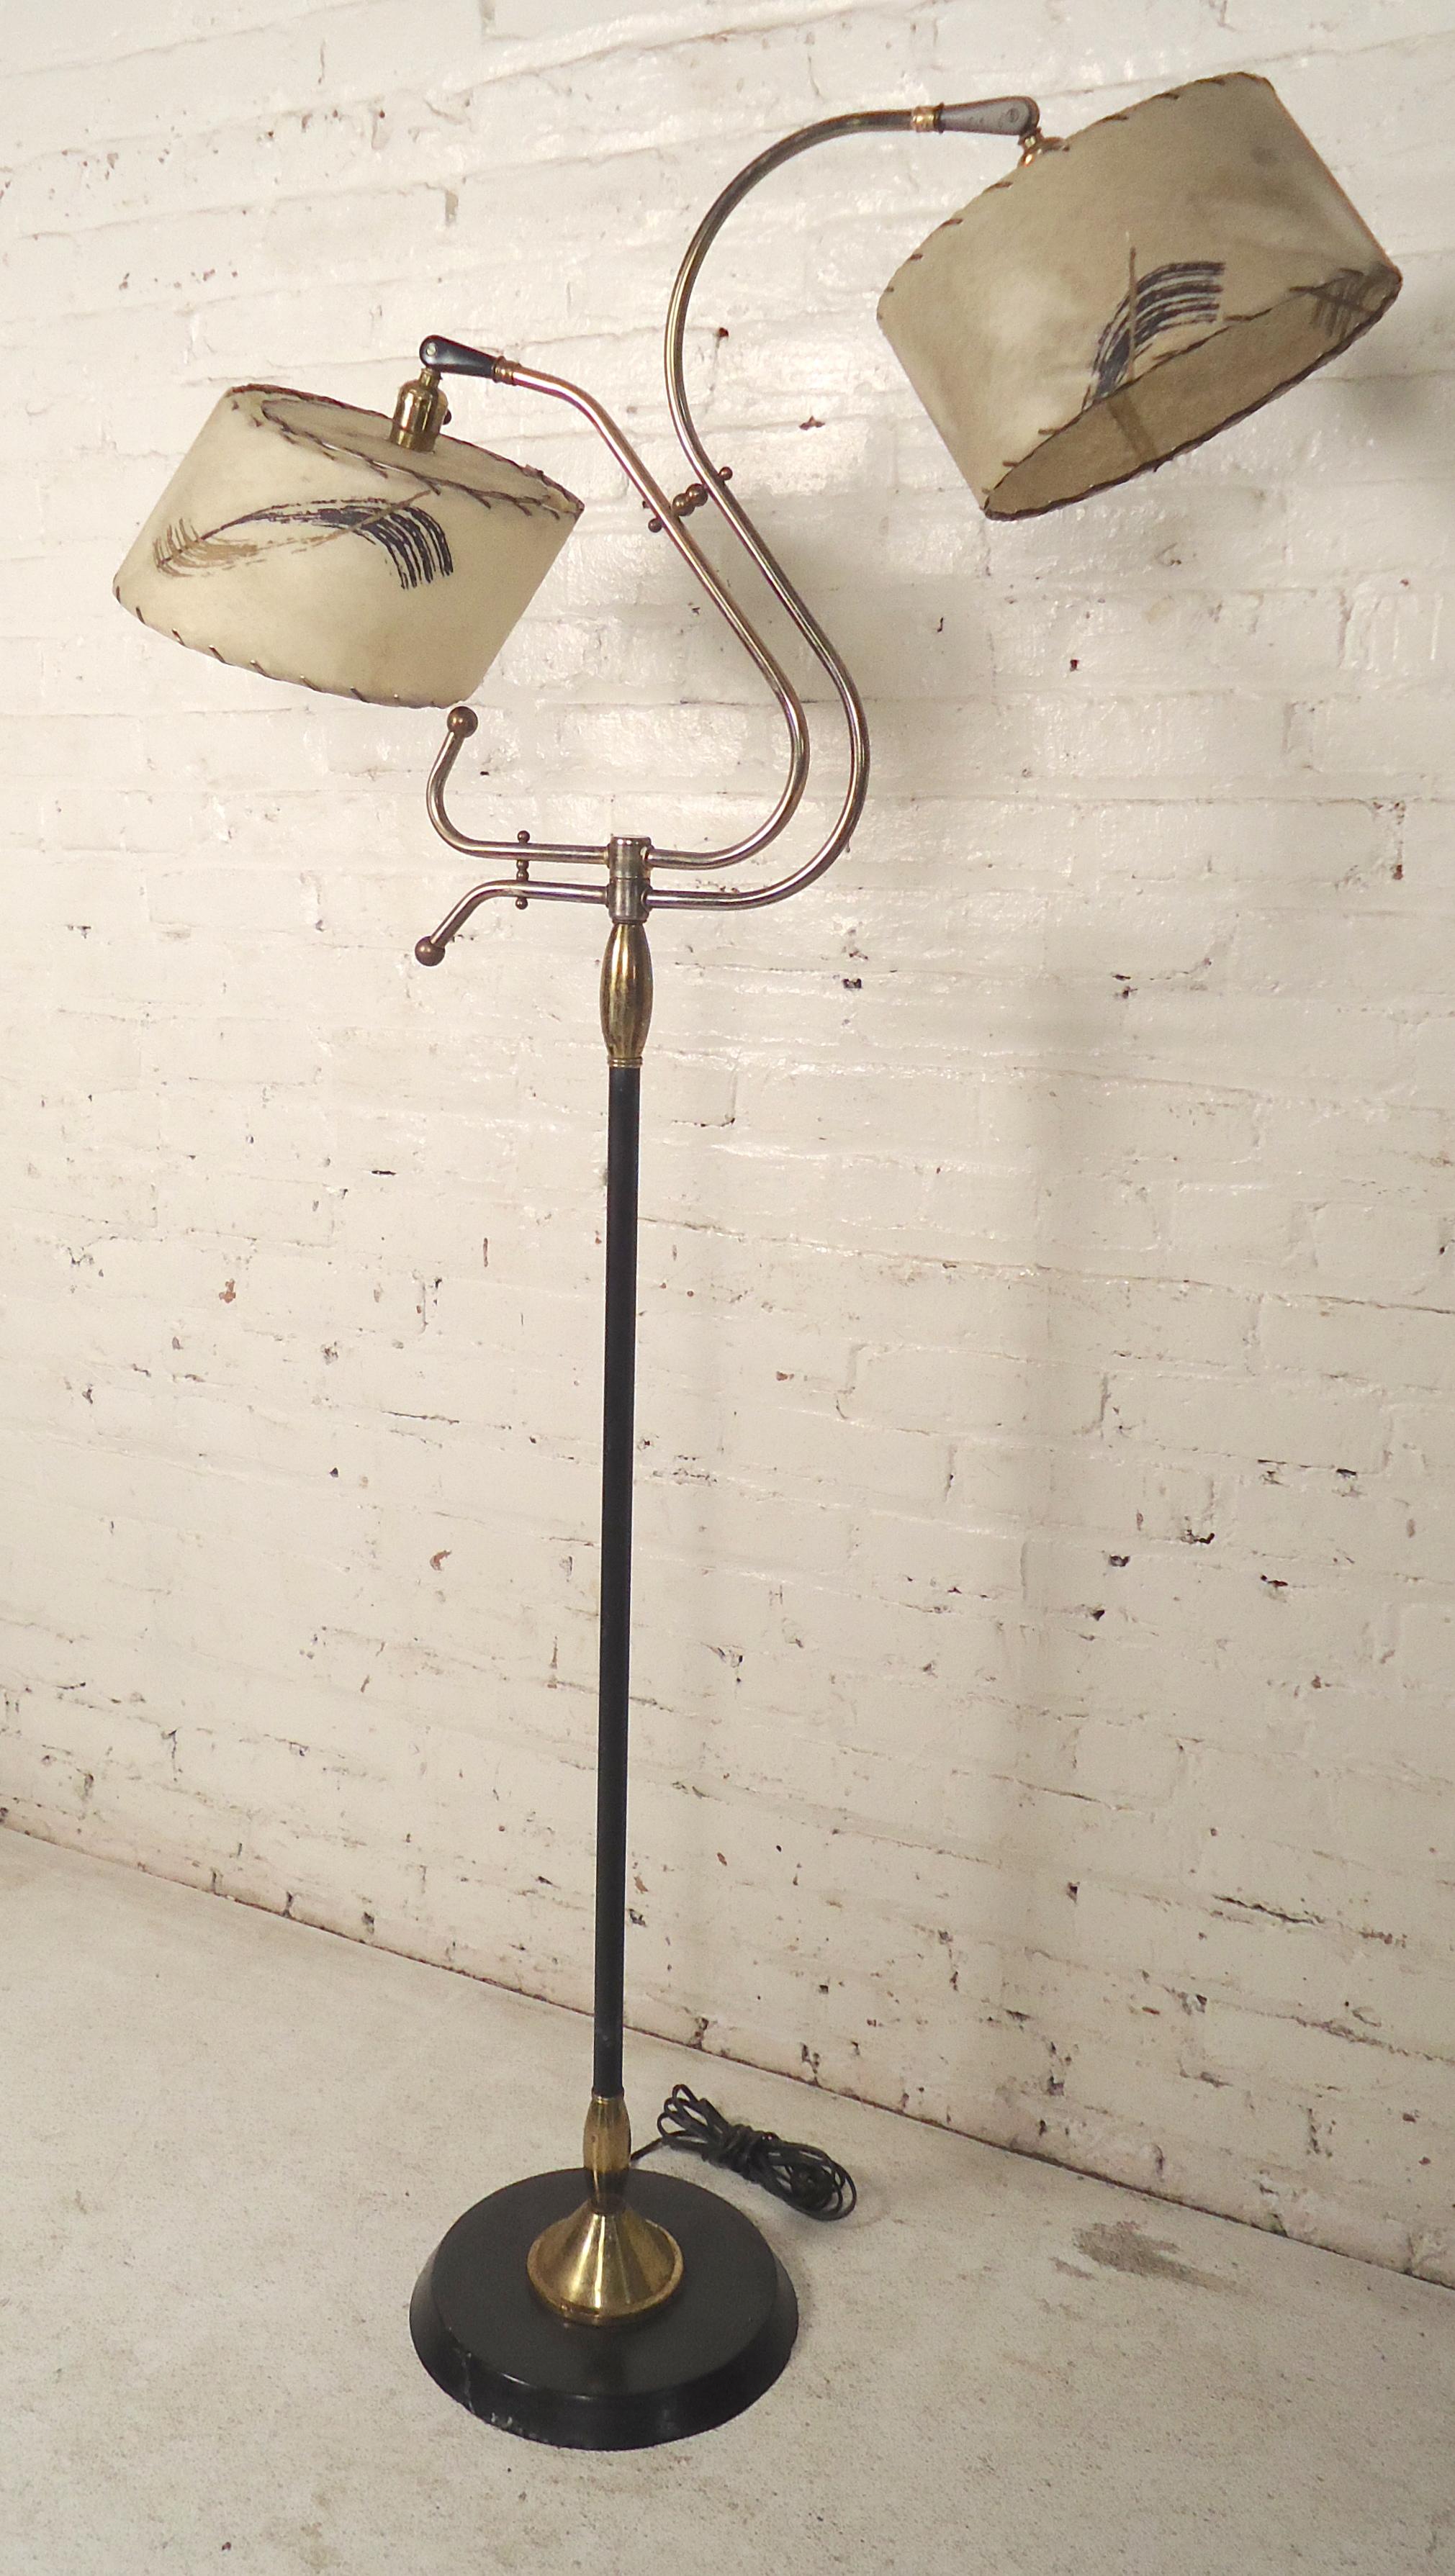 Vintage modern floor lamp with two sockets and original shades.
(Please confirm item location - NY or NJ - with dealer).
  